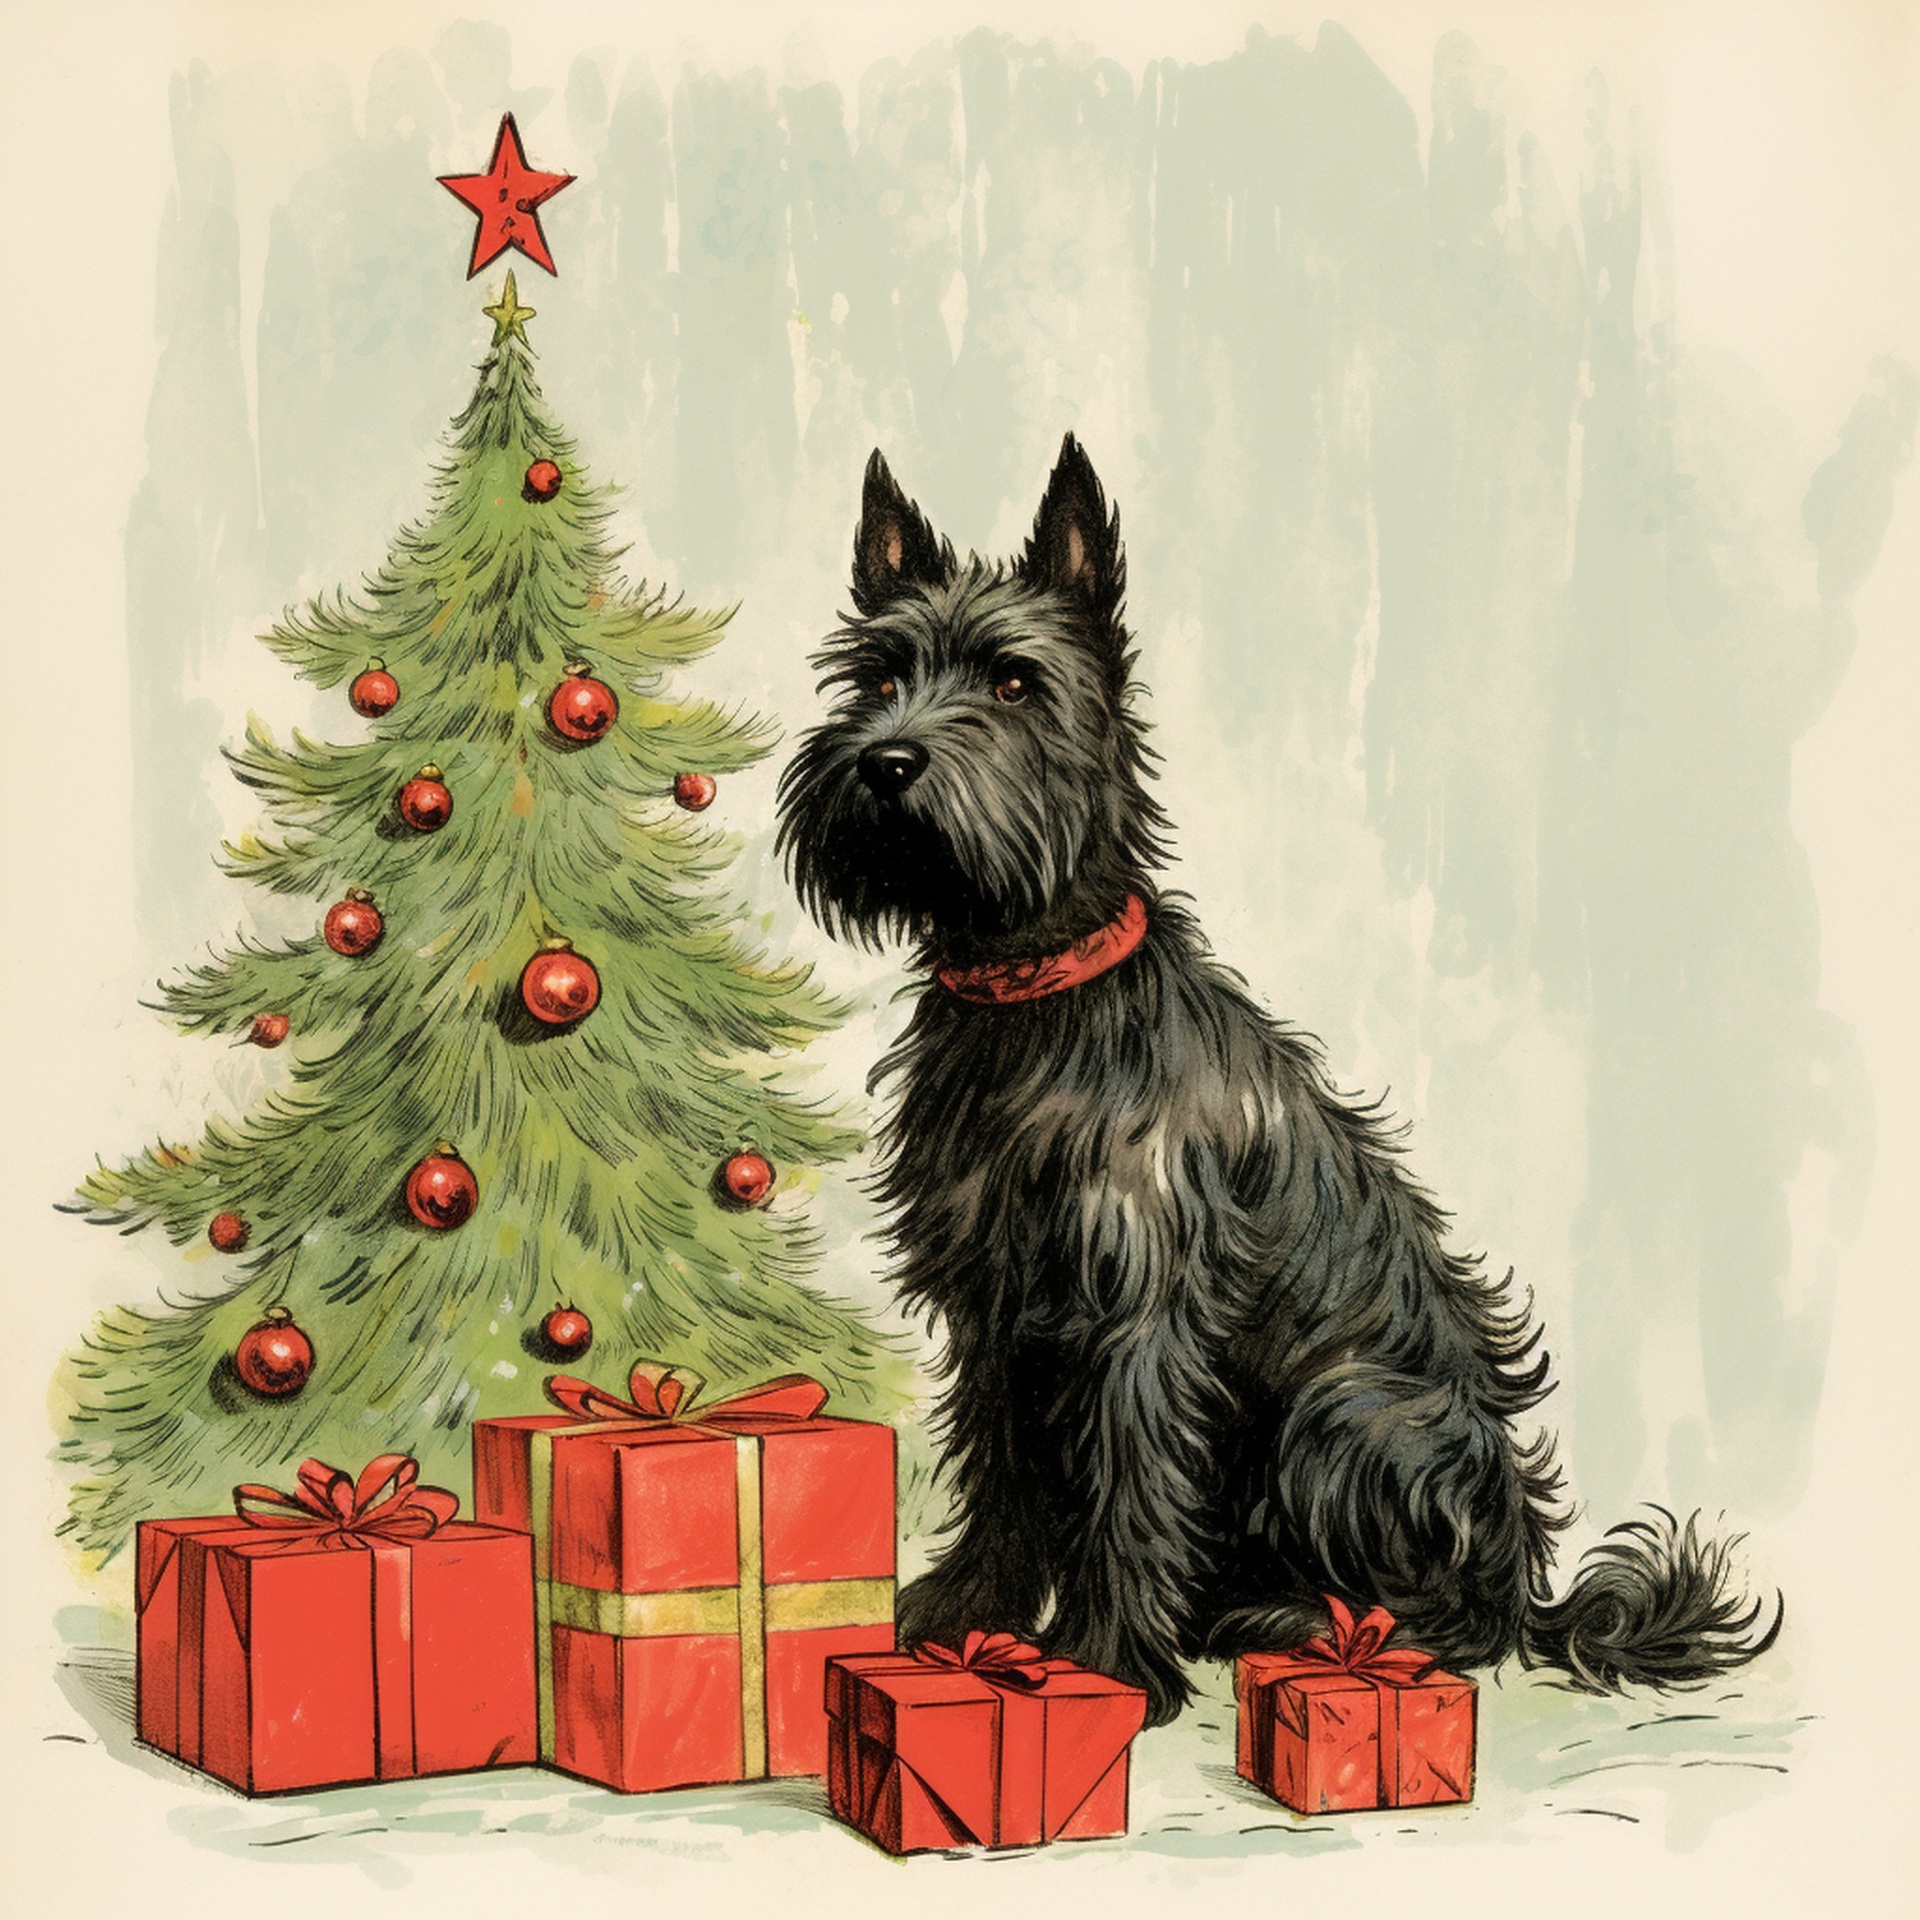 A black Scottish Terrier dog sitting between gifts and a tree